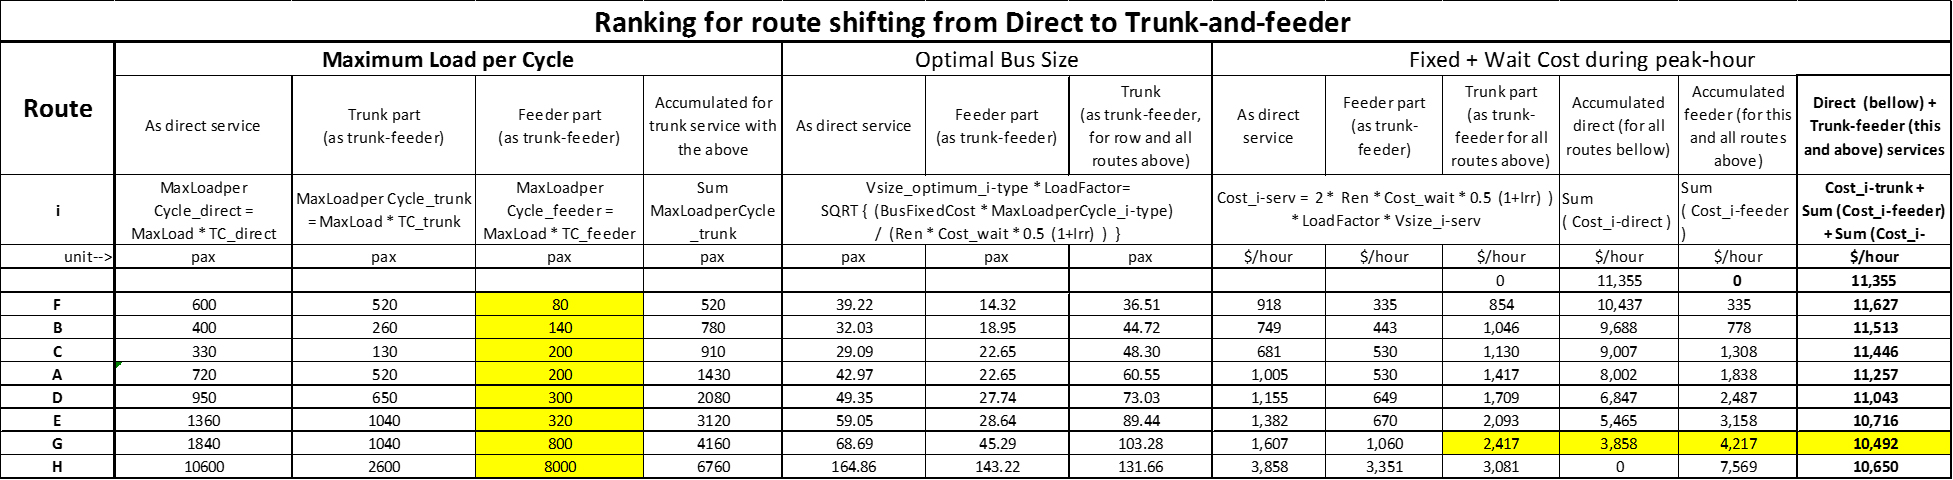 Table 6.28 Route Selection to Shift from Direct to Trunk-and-Feeder Service